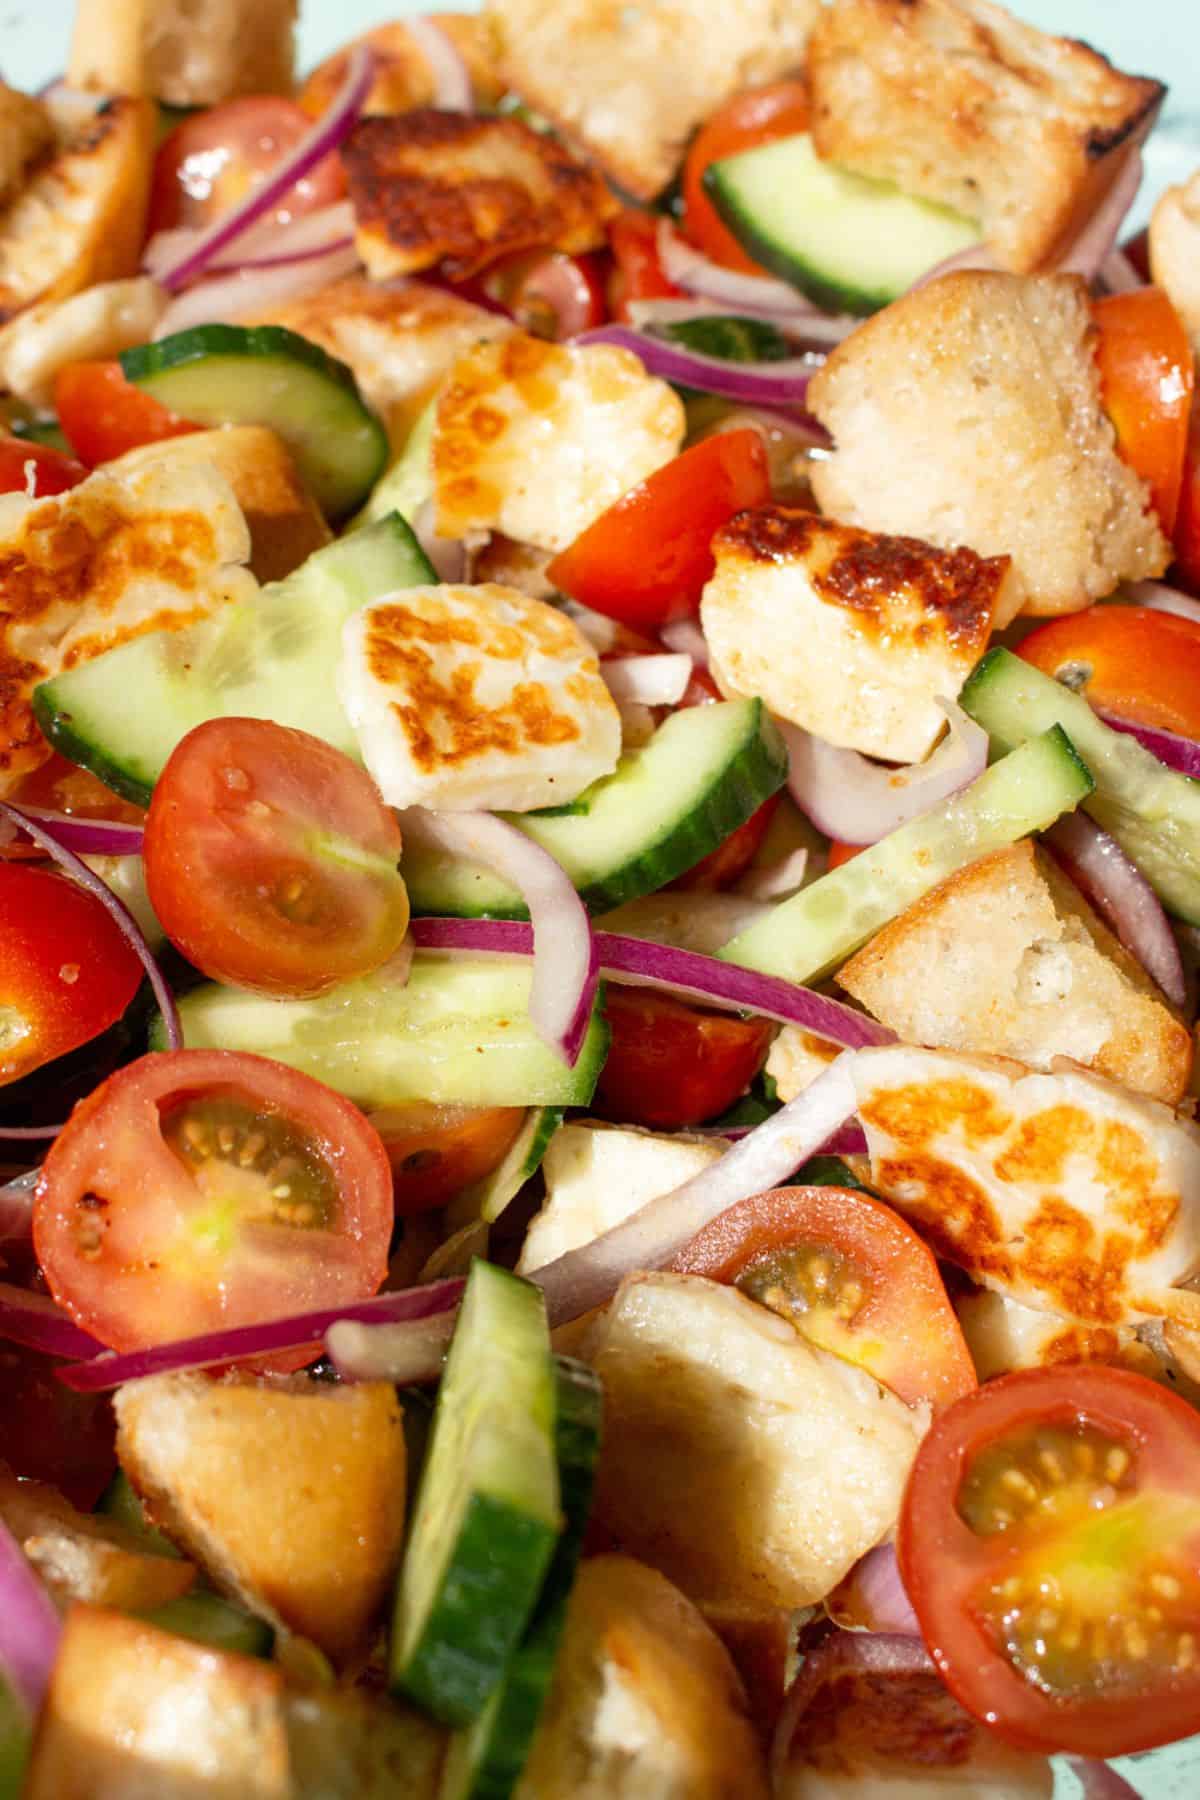 Close up of Halloumi and bread salad with cherry tomatoes, cucumber, red onion, browned halloumi and ciabatta bread pieces.